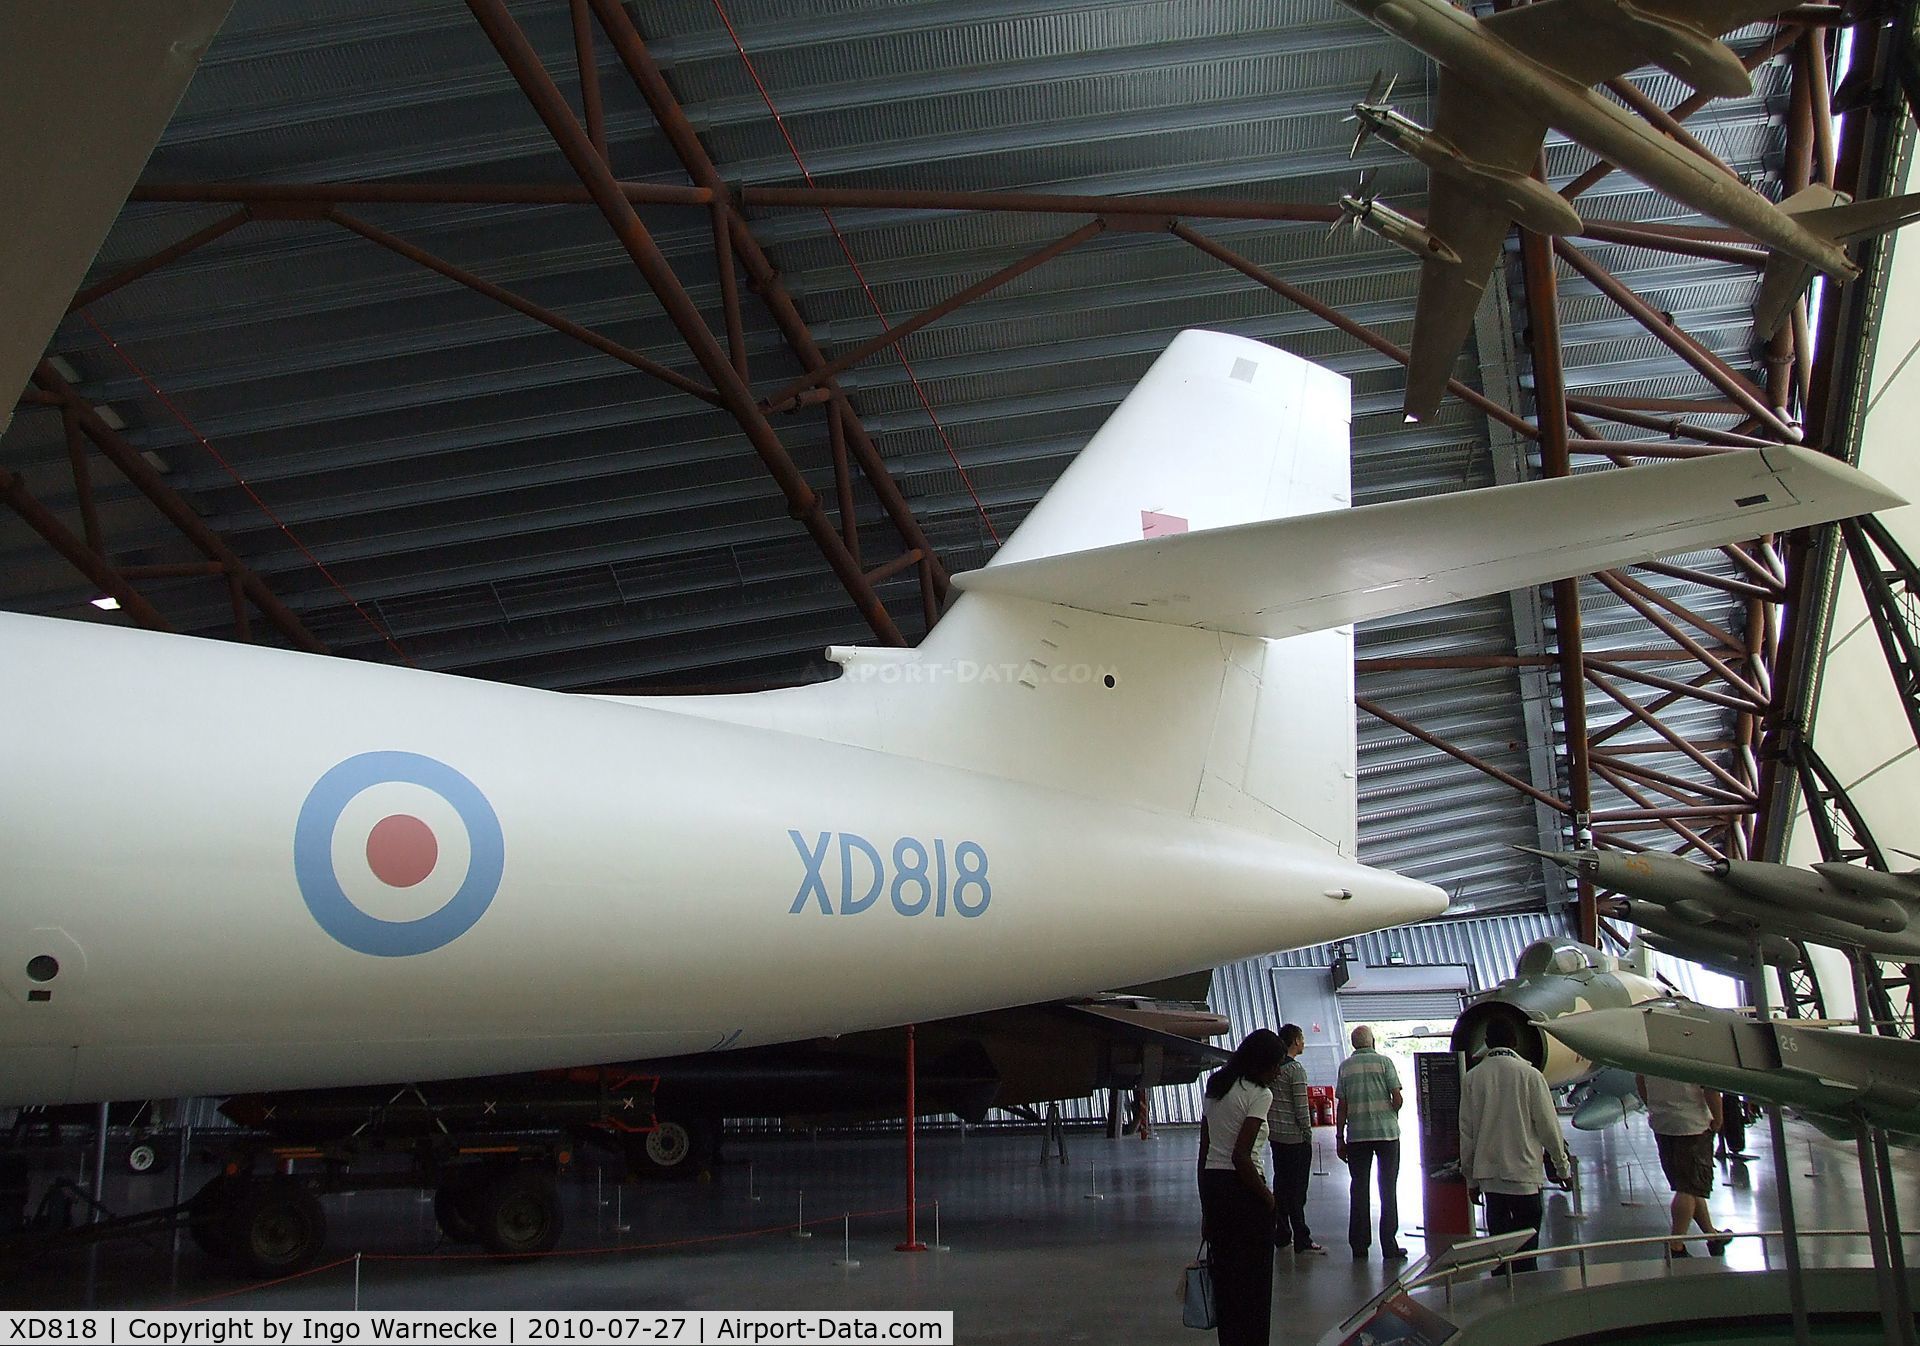 XD818, 1956 Vickers Valiant BK.1 C/N Not Found XD875, Vickers Valiant BK1 at the RAF Museum, Cosford